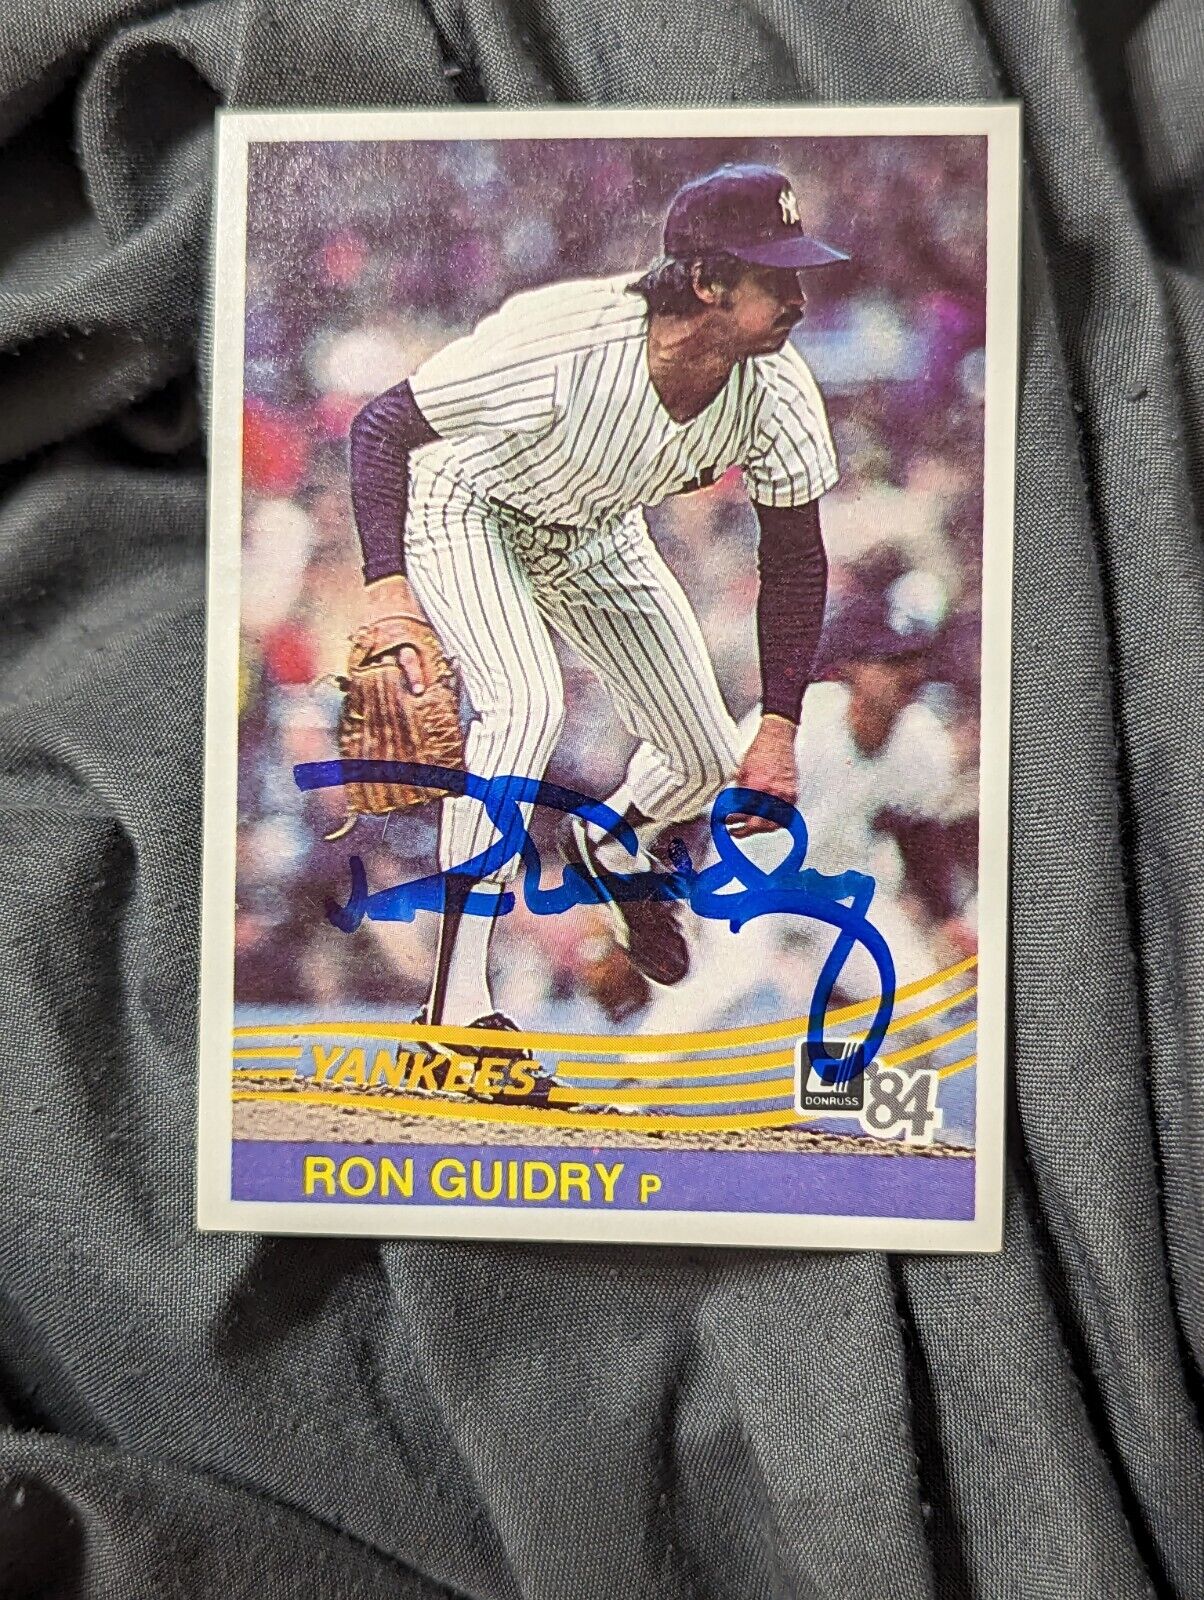 RON GUIDRY AUTOGRAPH SIGNED Card New York YANKEES 1984 Donruss 